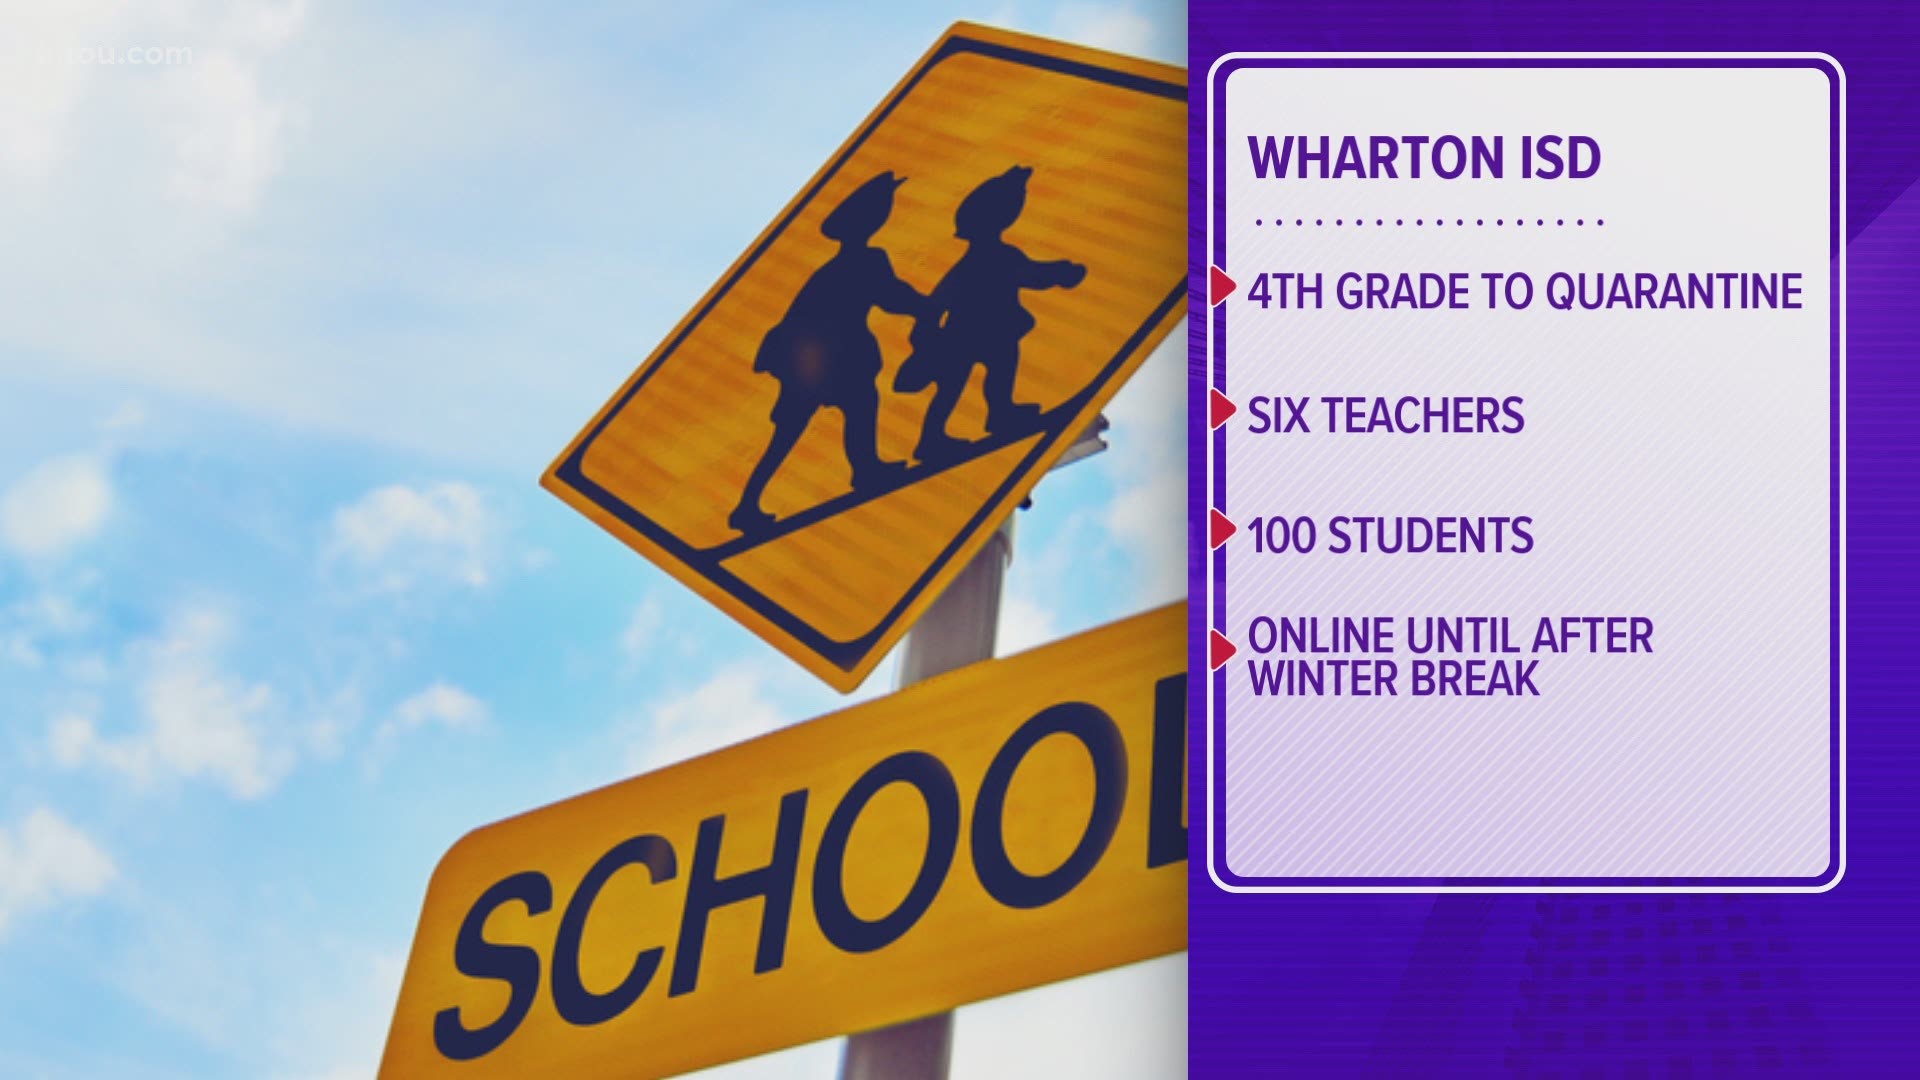 A Wharton ISD teacher tested positive for the coronavirus, leading to the move to quarantine all students and teachers due to close contact.